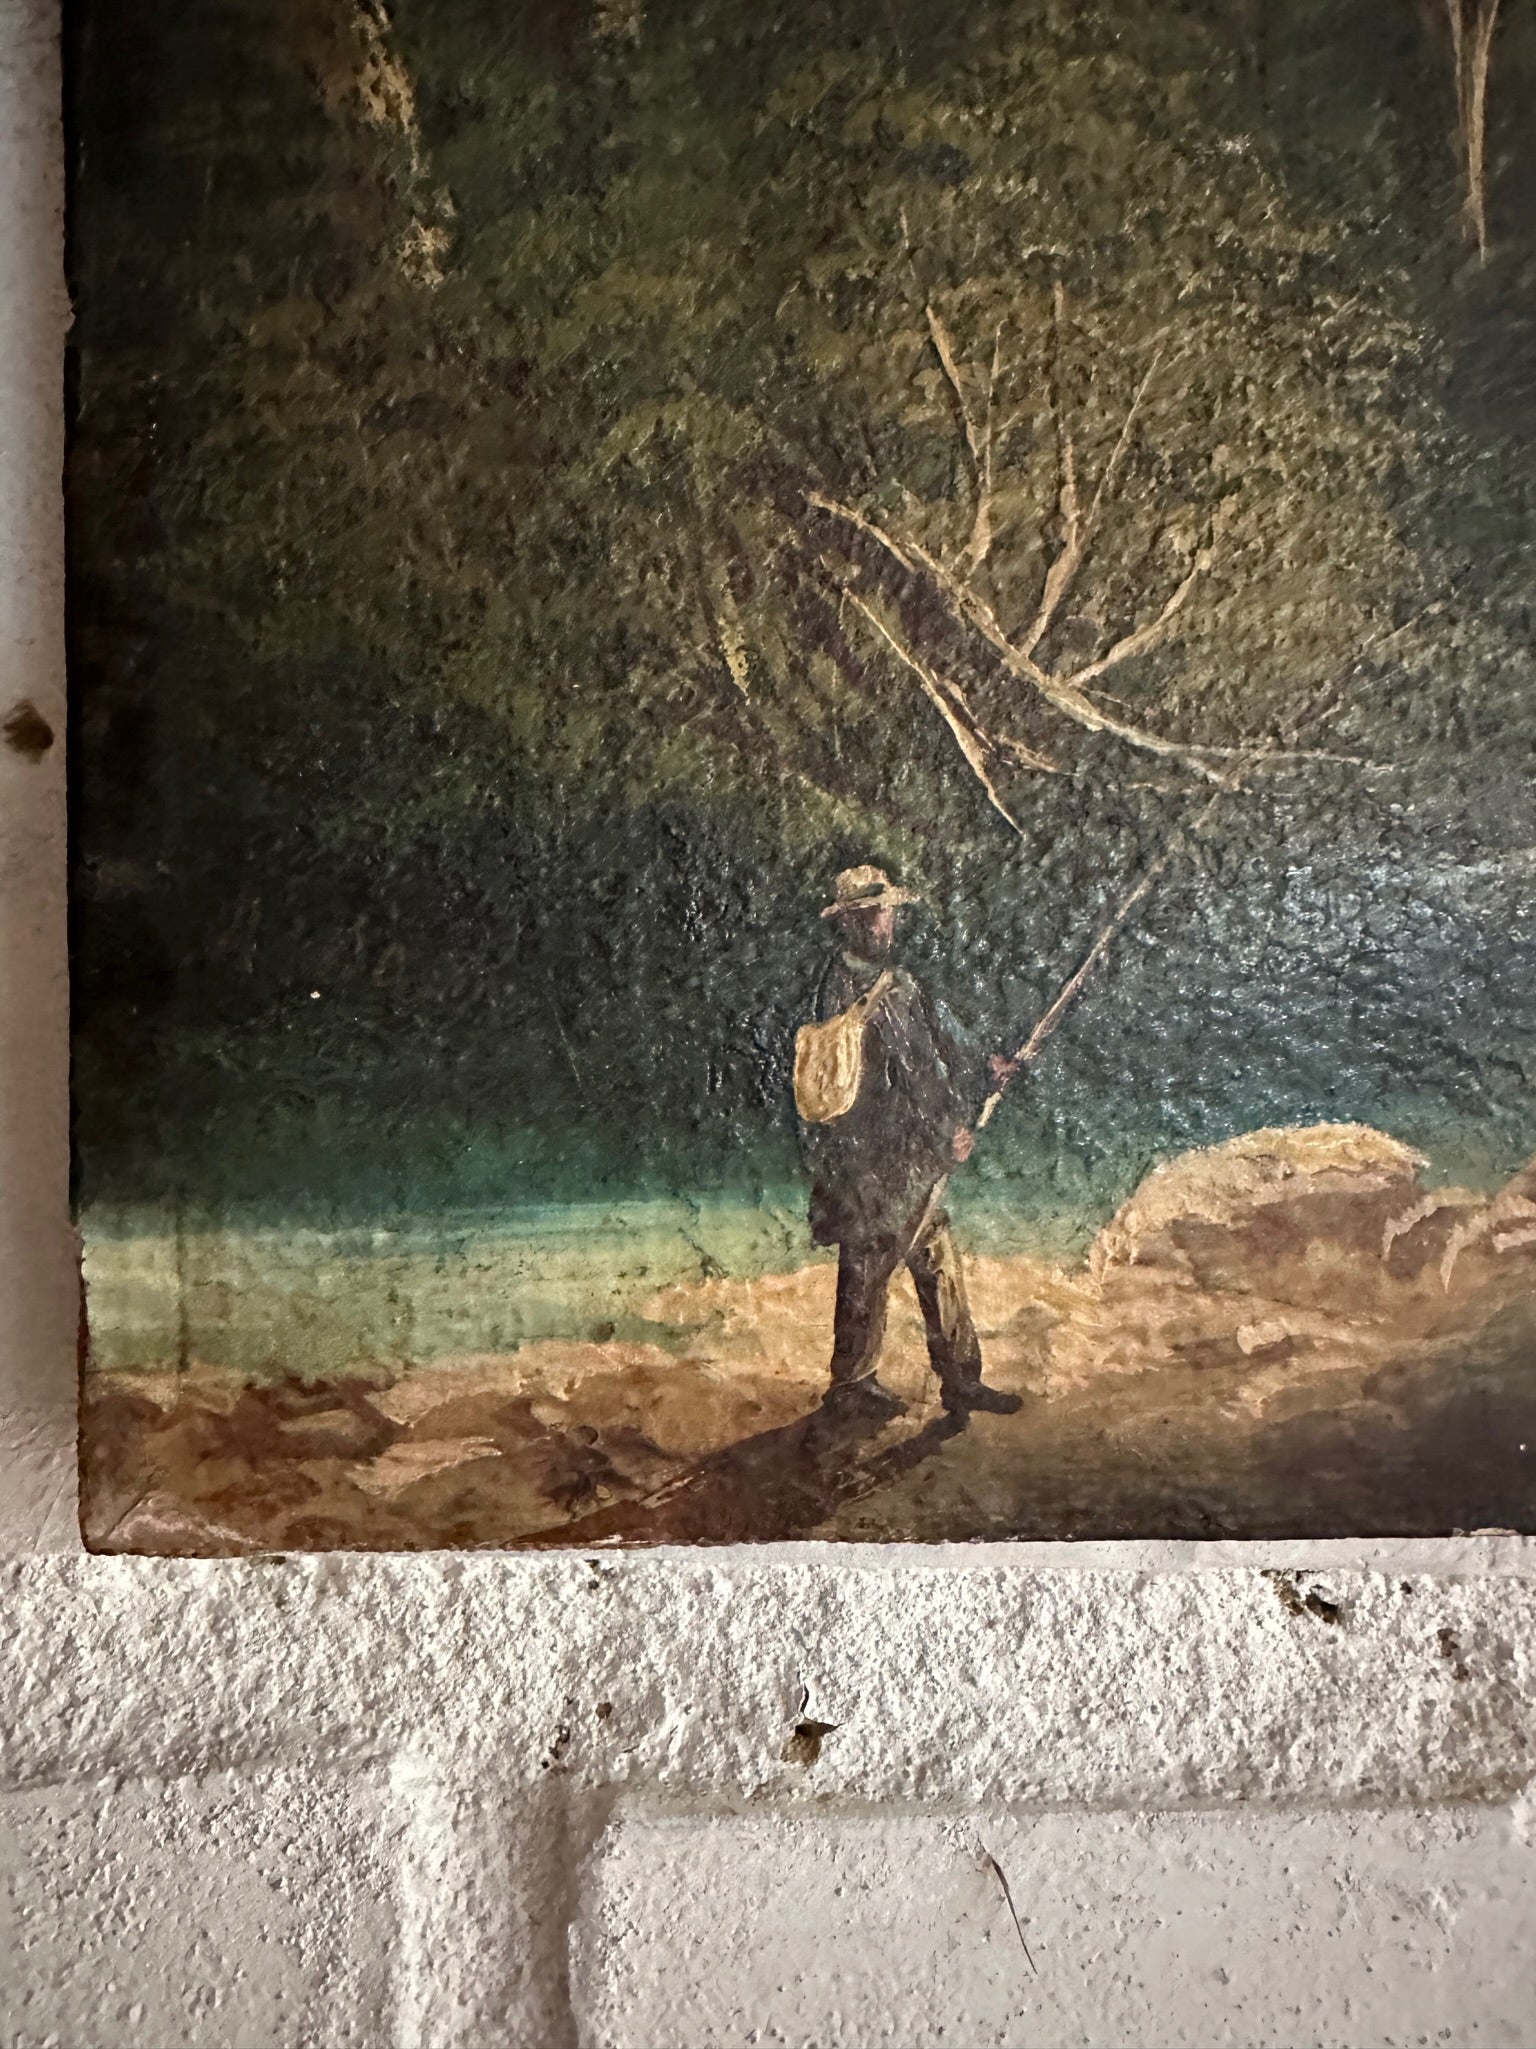 Small 19th Century Landscape with Fisherman: Unframed Oil on Canvas